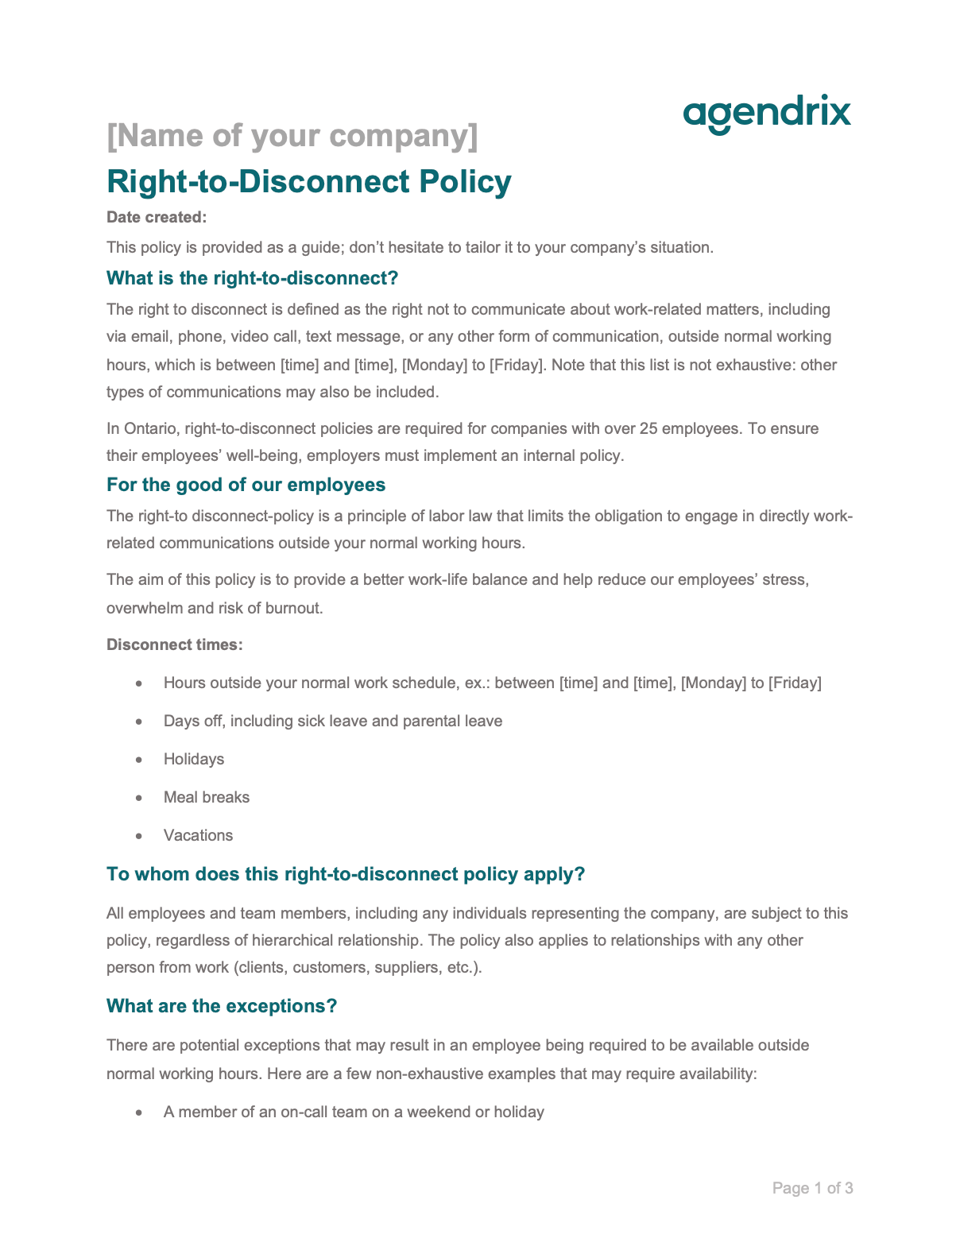 Right-to-disconnect policy template